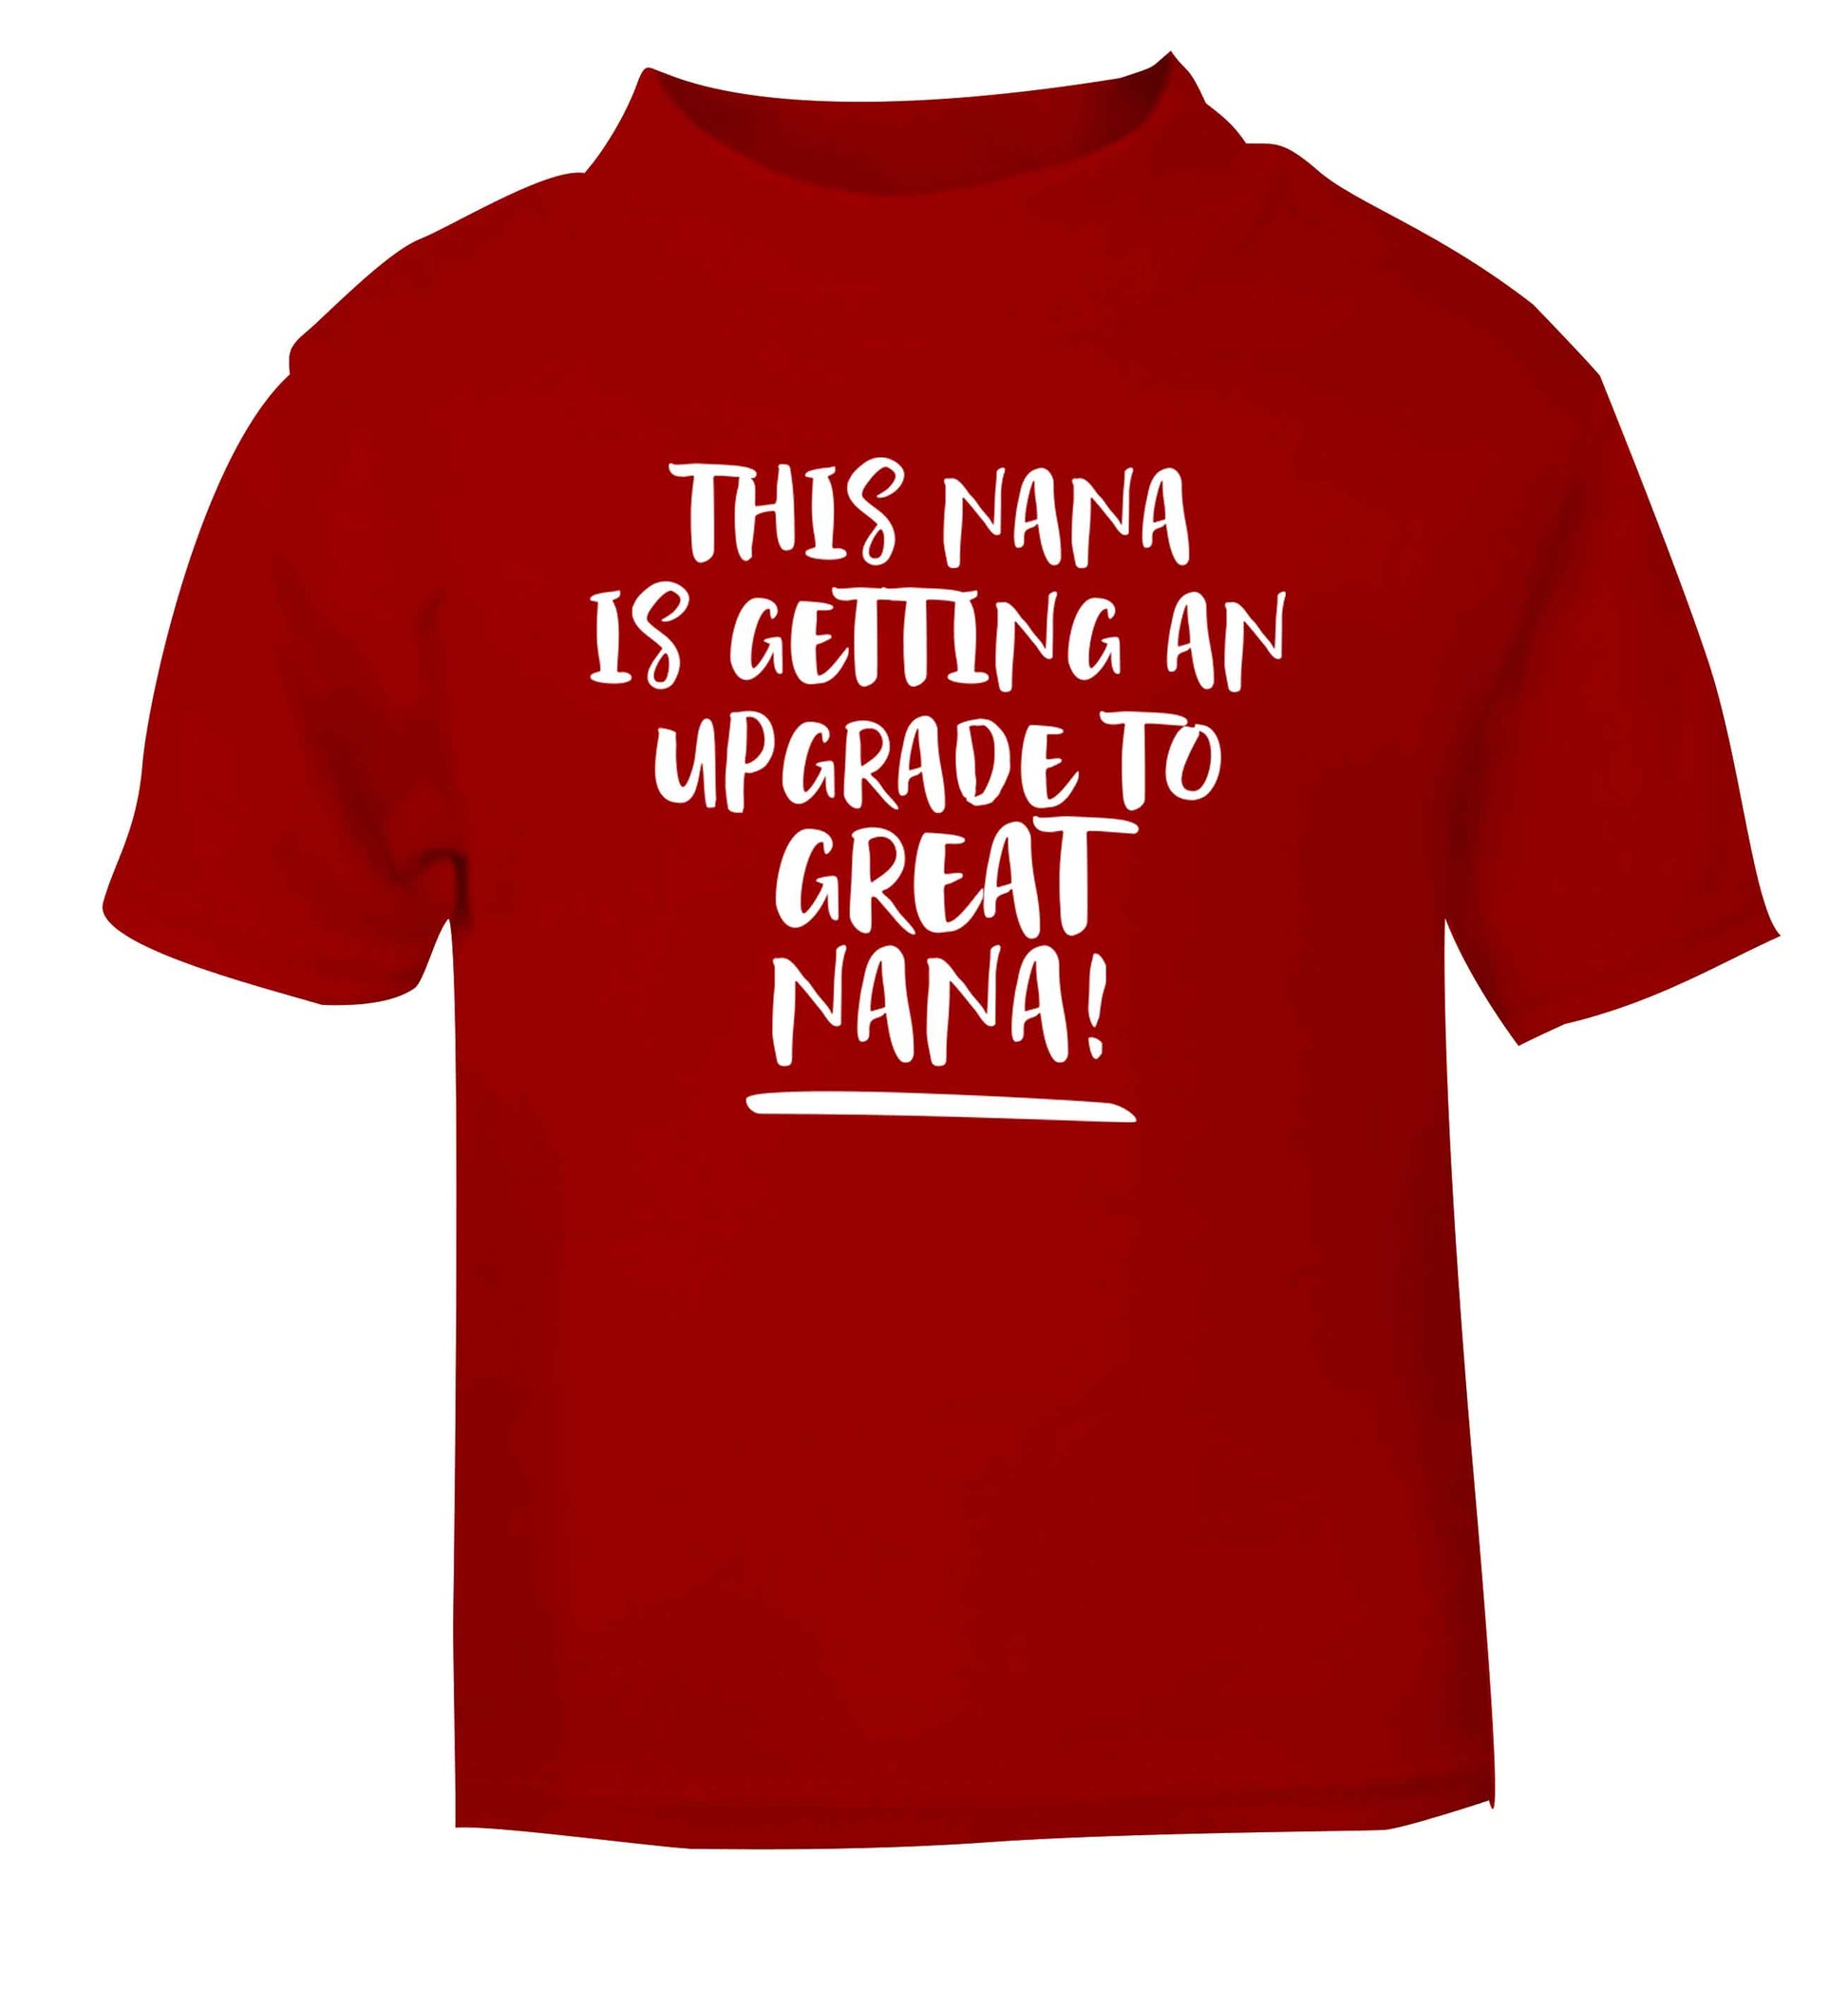 This nana is getting an upgrade to great nana! red Baby Toddler Tshirt 2 Years